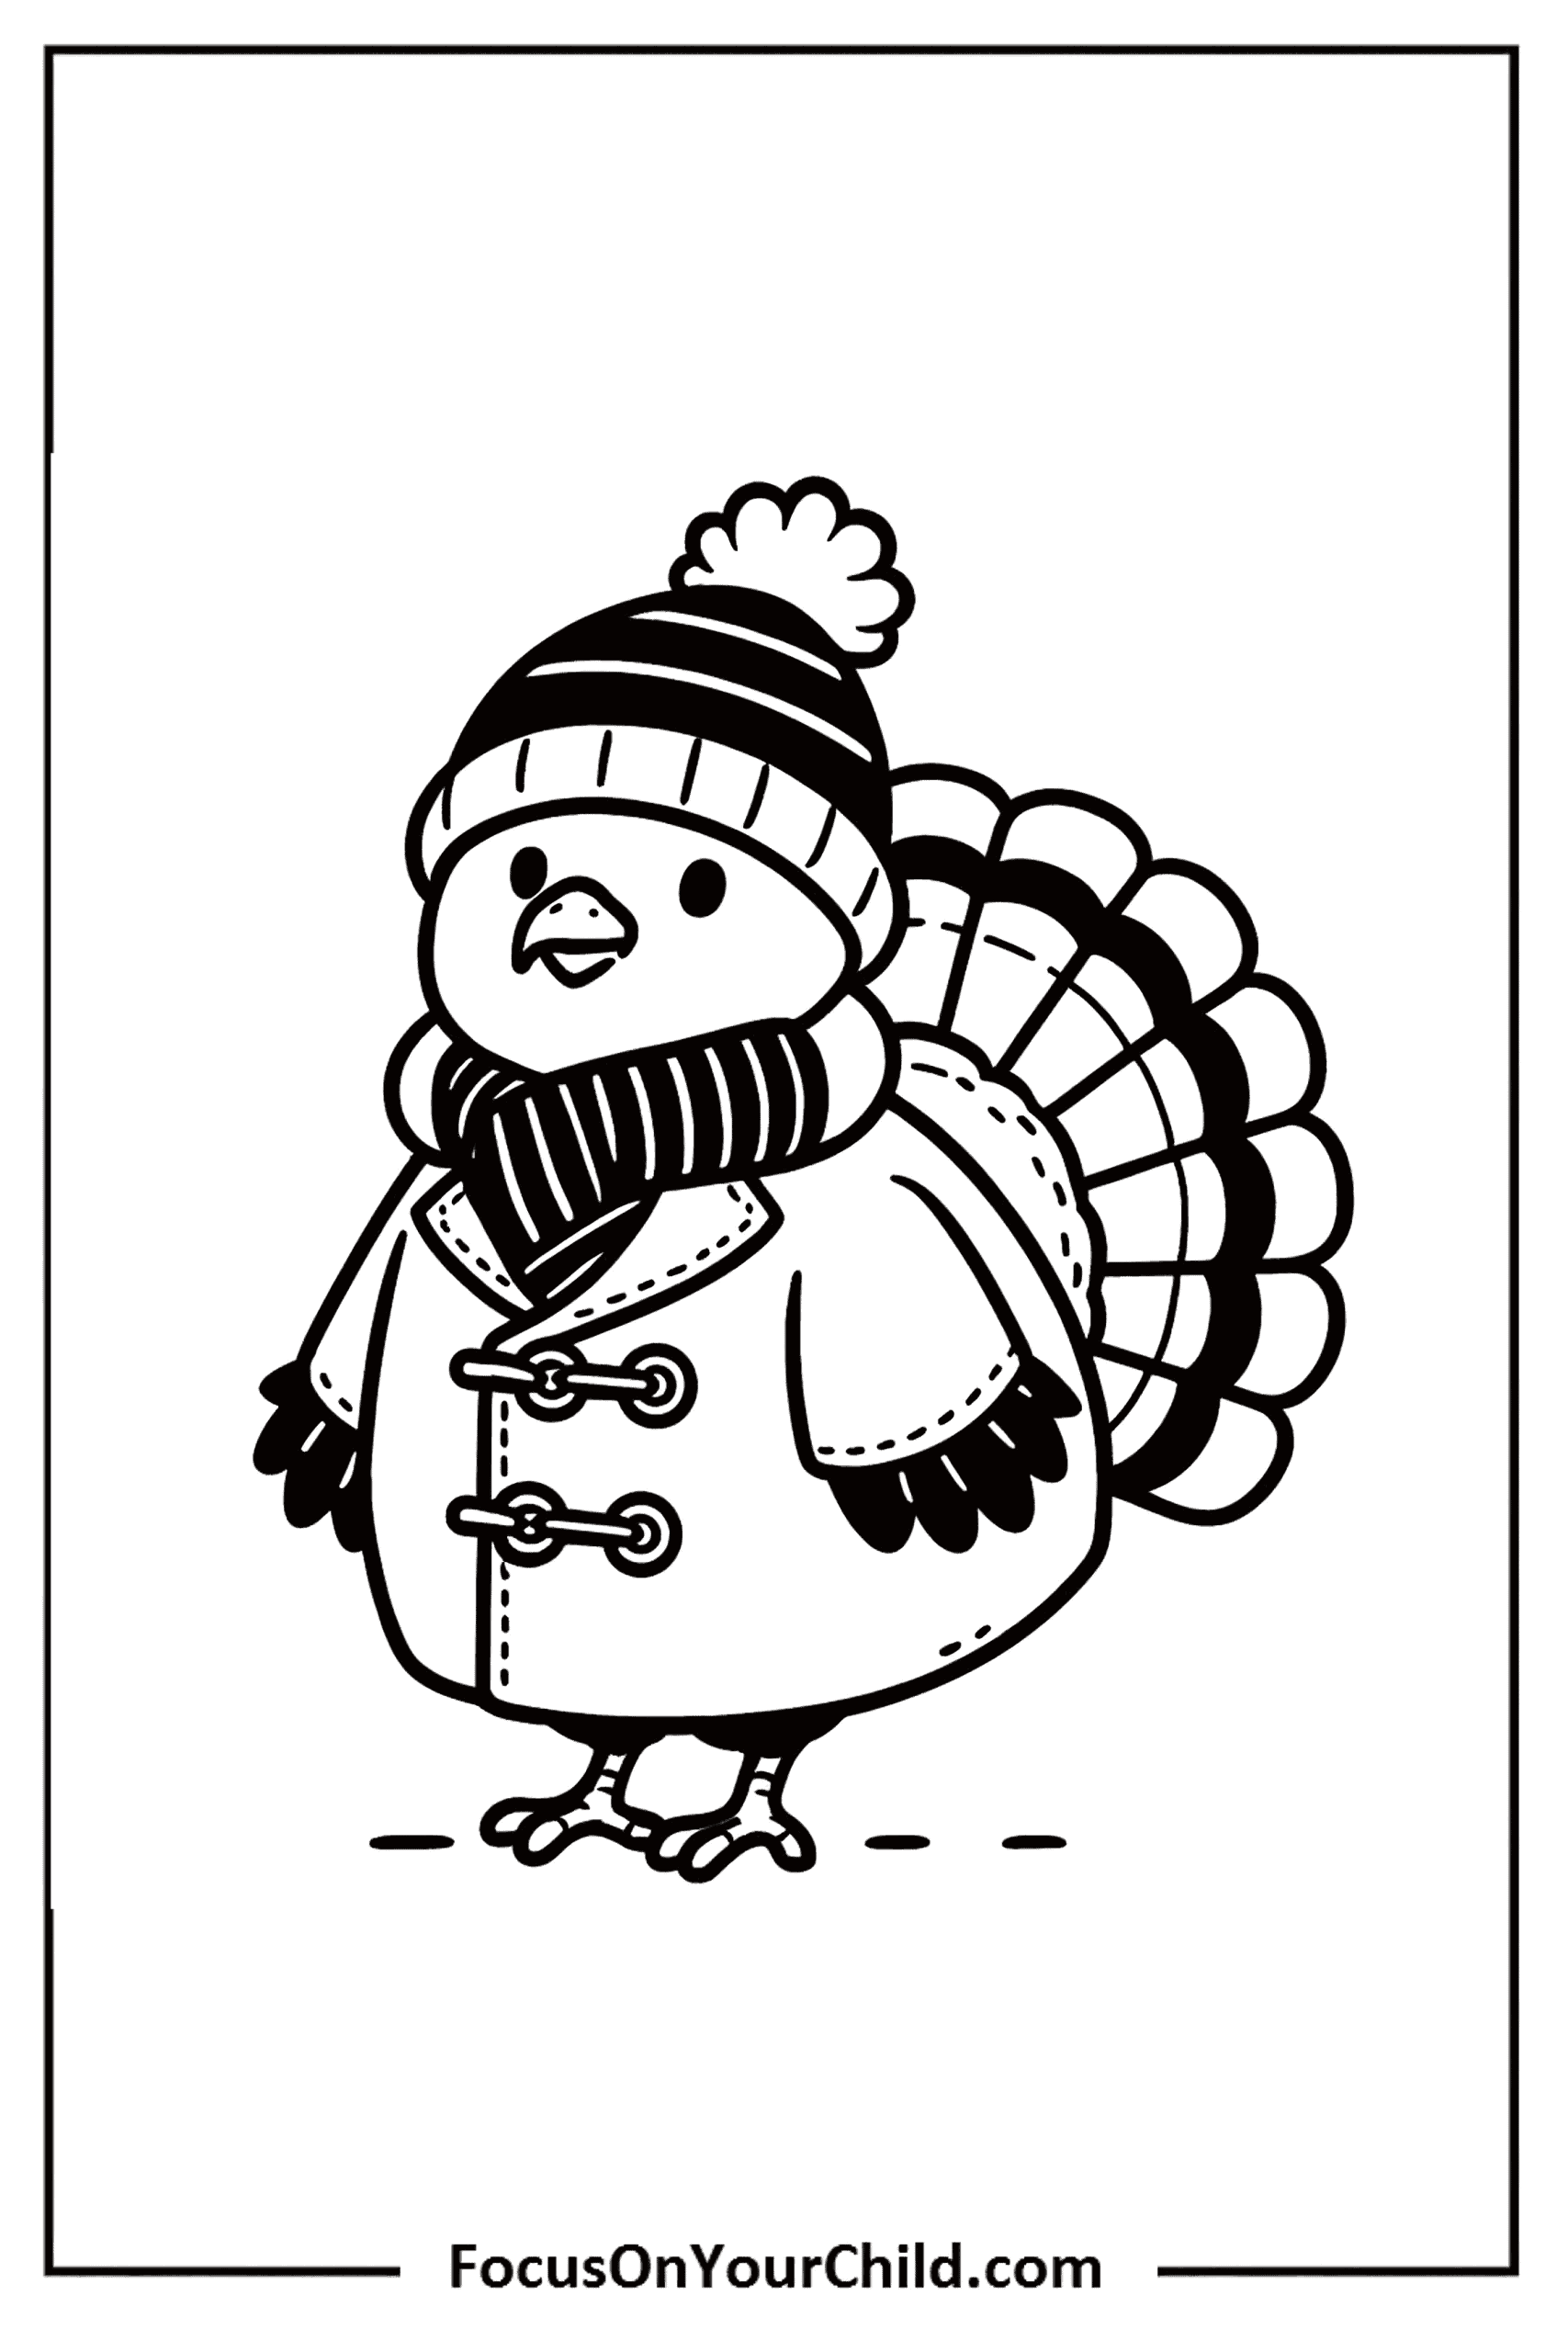 Charming winter turkey illustration in stylish attire for cold weather.